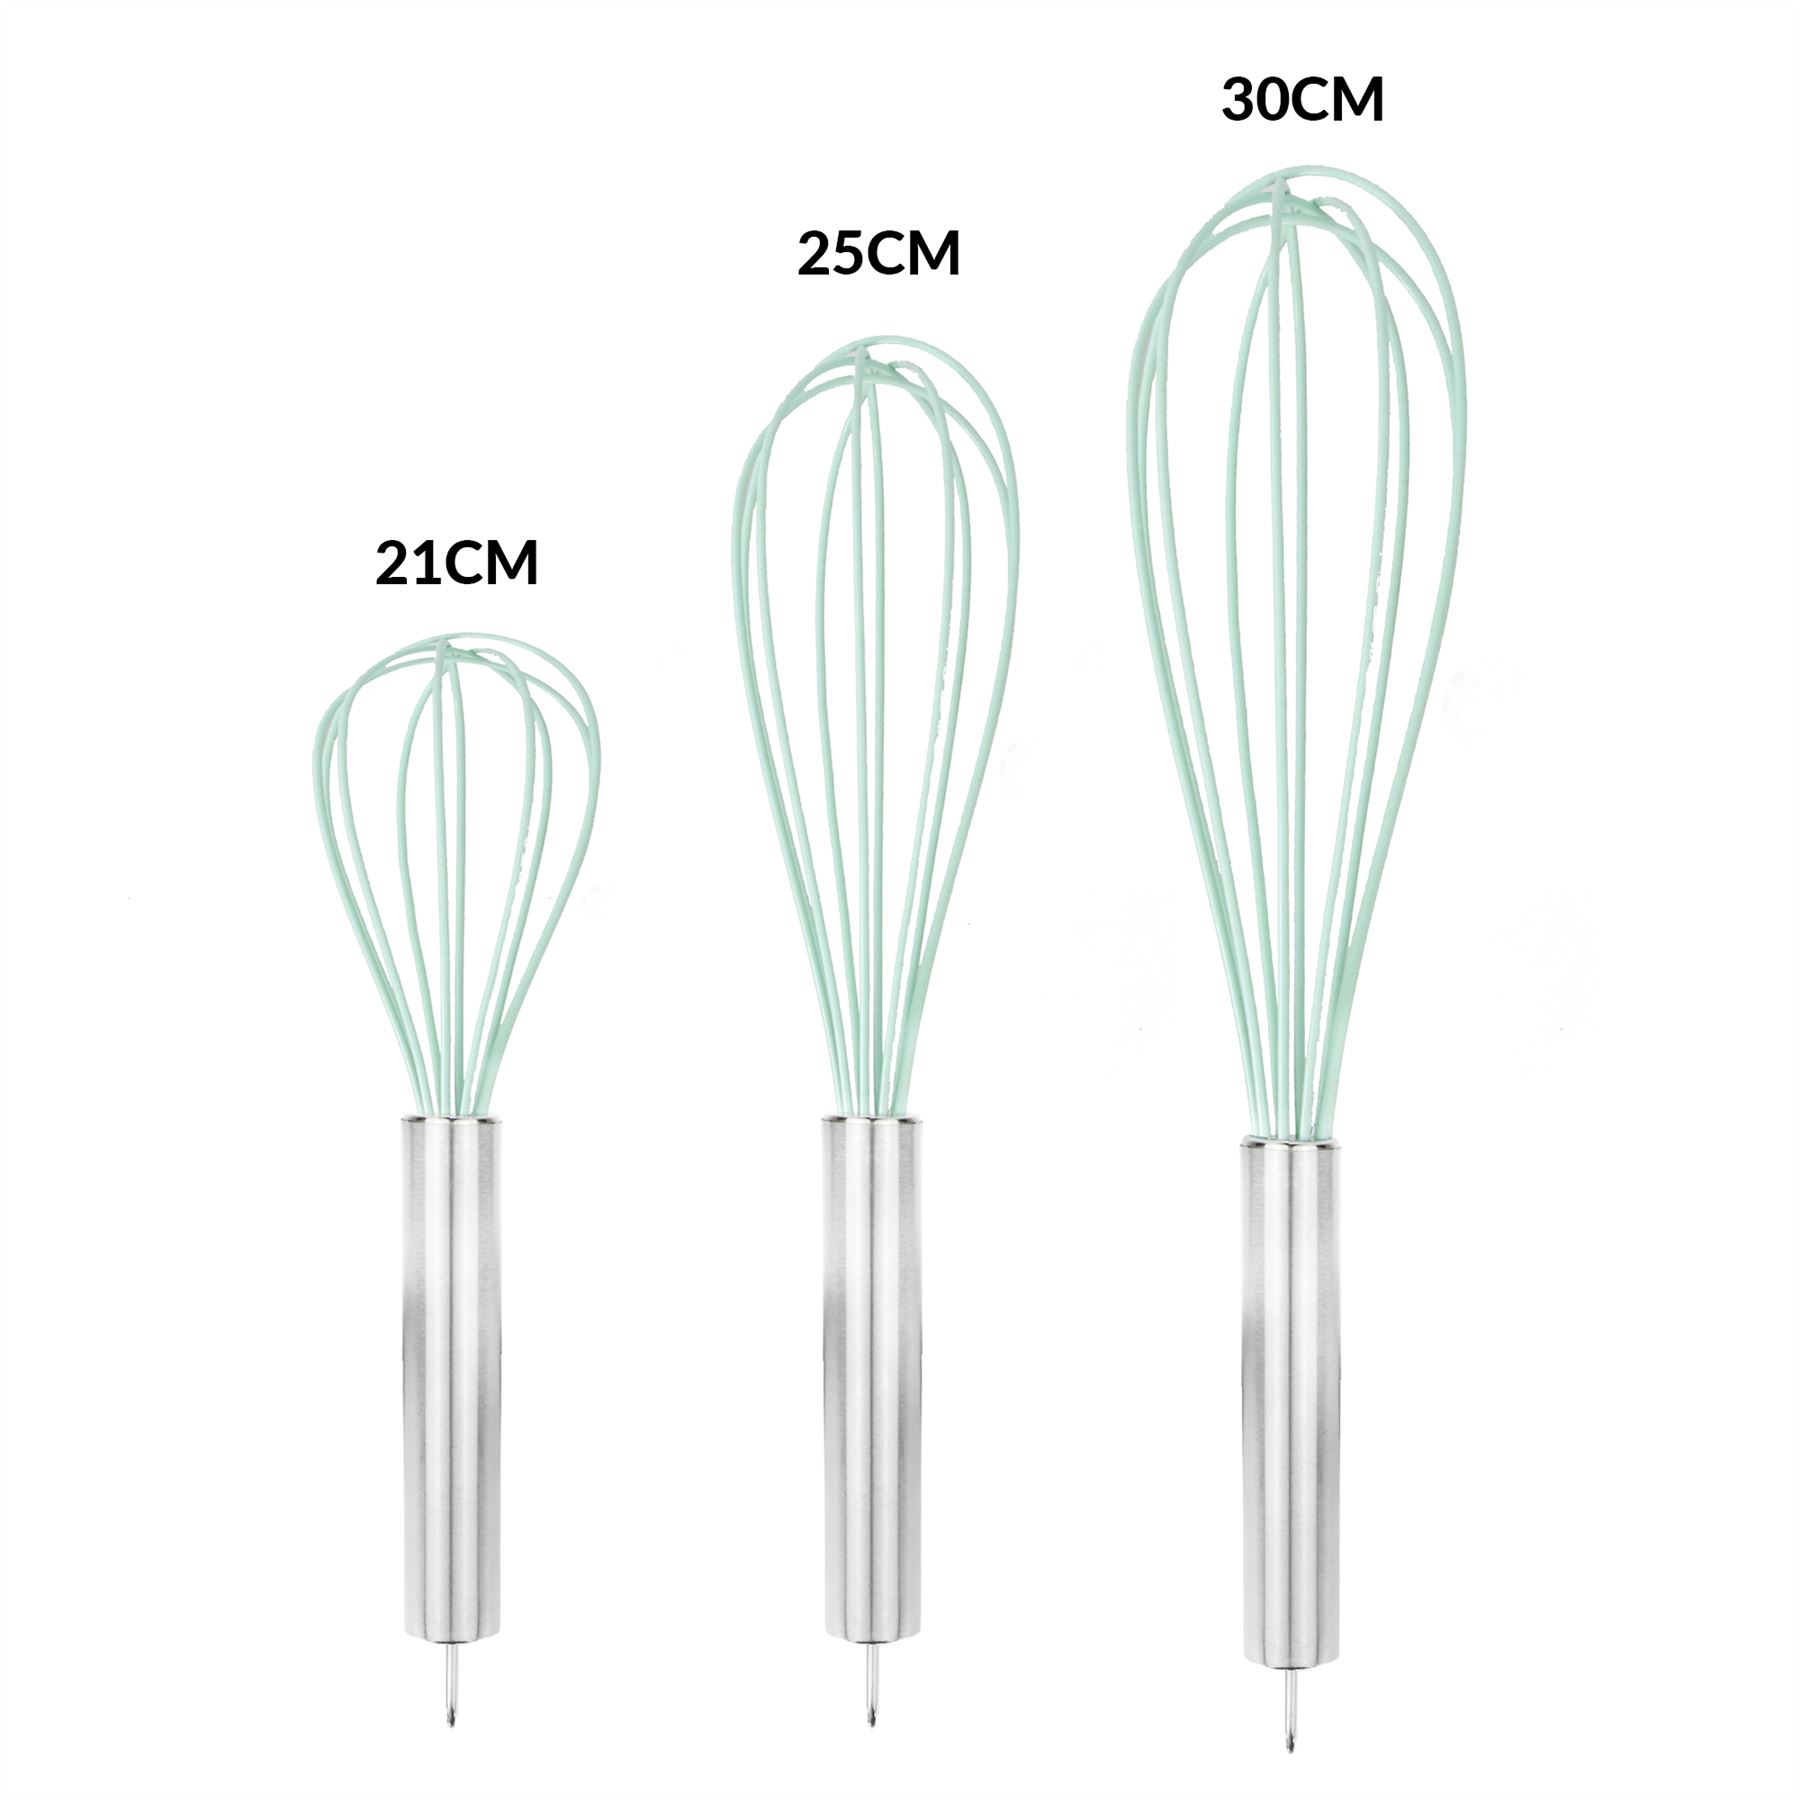 Silicone Whisks - Set of 3 | M&W